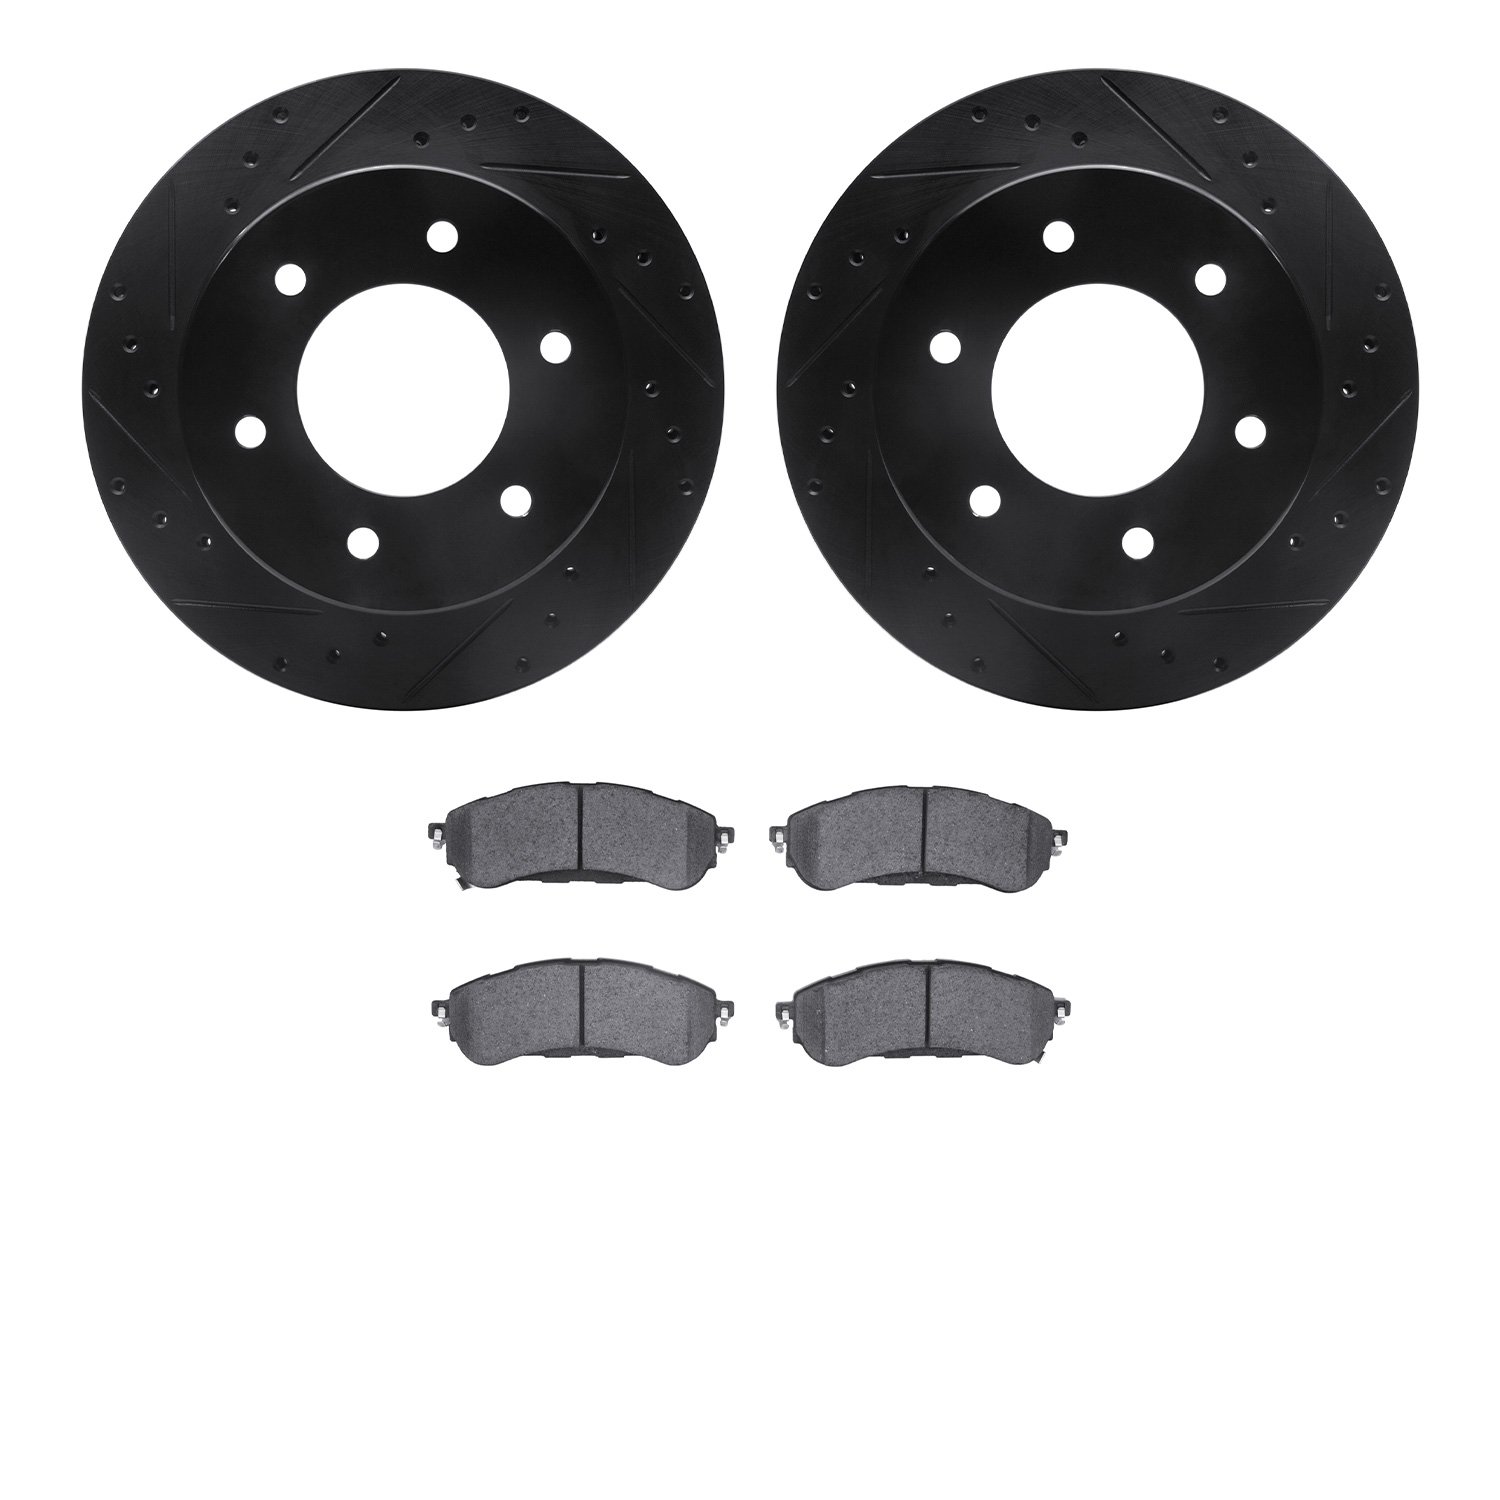 8502-54146 Drilled/Slotted Brake Rotors w/5000 Advanced Brake Pads Kit [Black], Fits Select Ford/Lincoln/Mercury/Mazda, Position